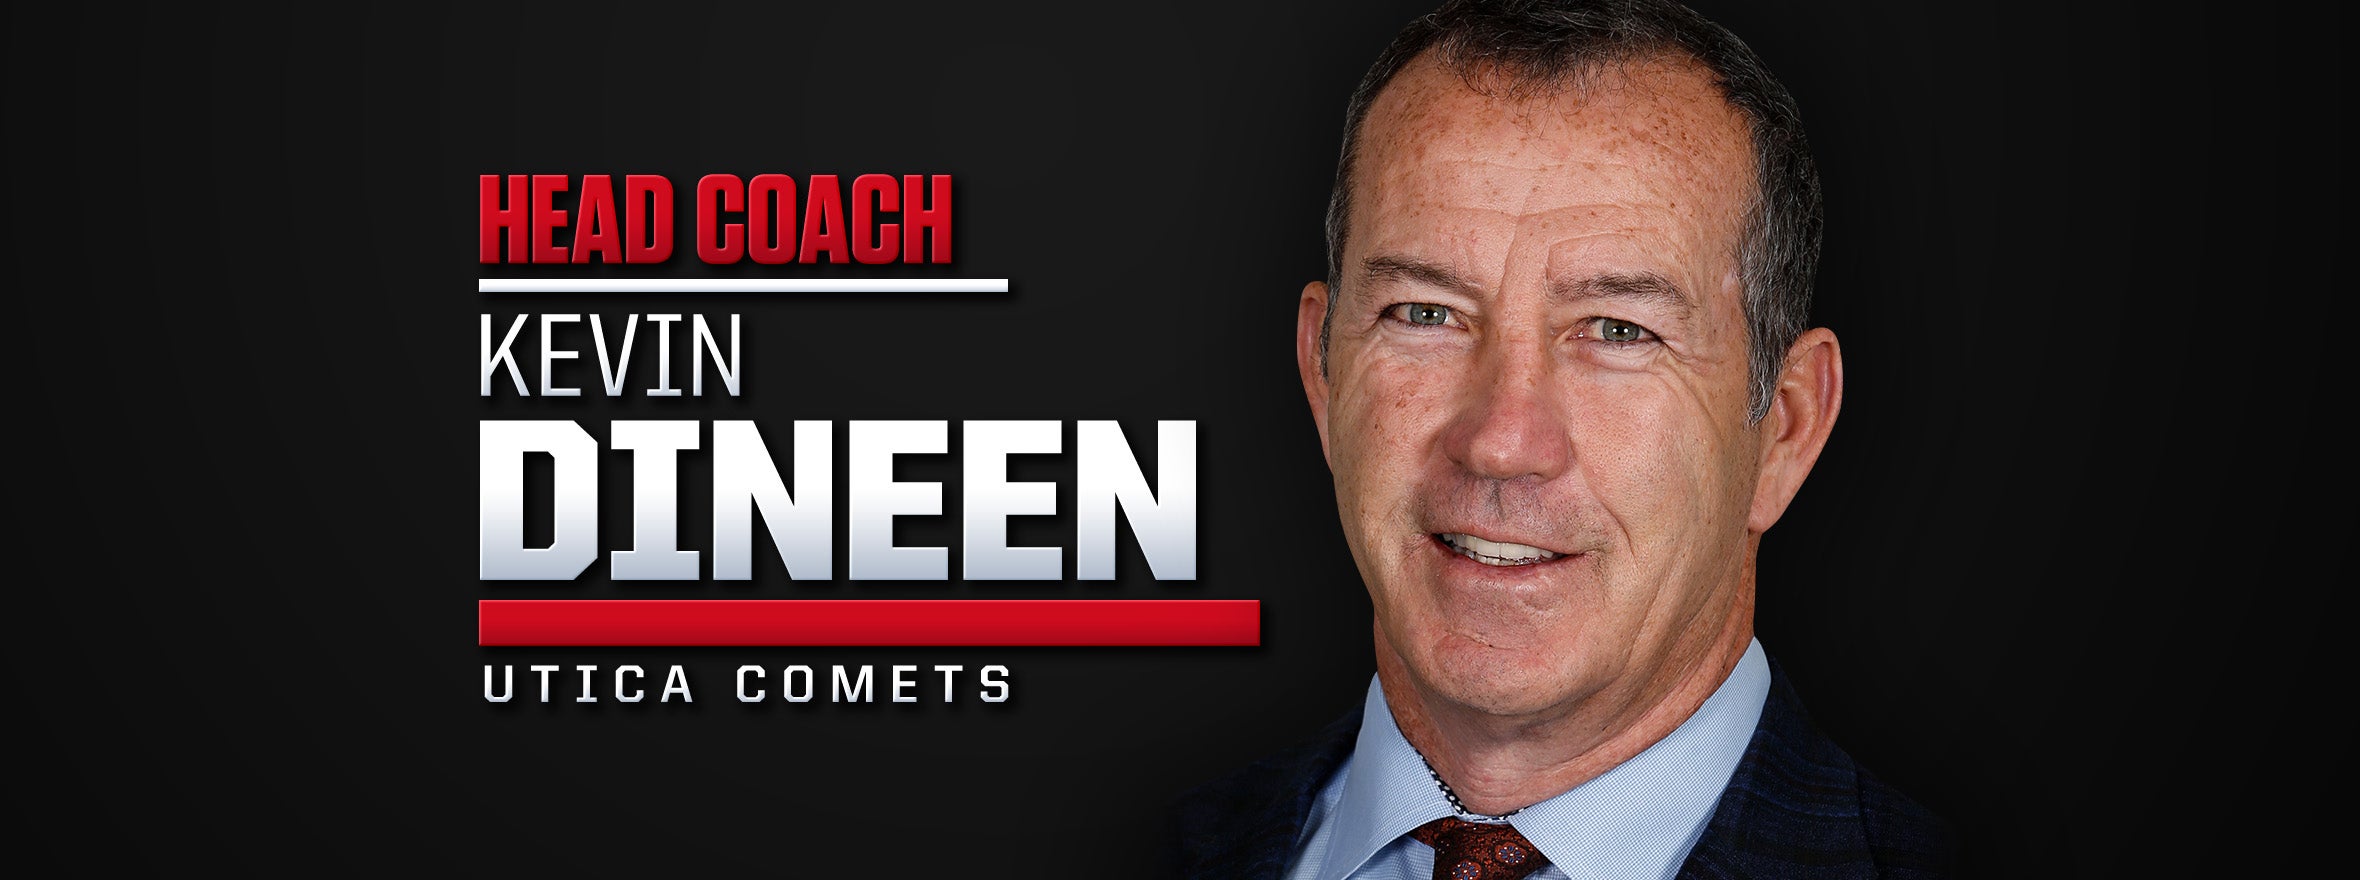 Kevin Dineen Named Third Head Coach in Comets History